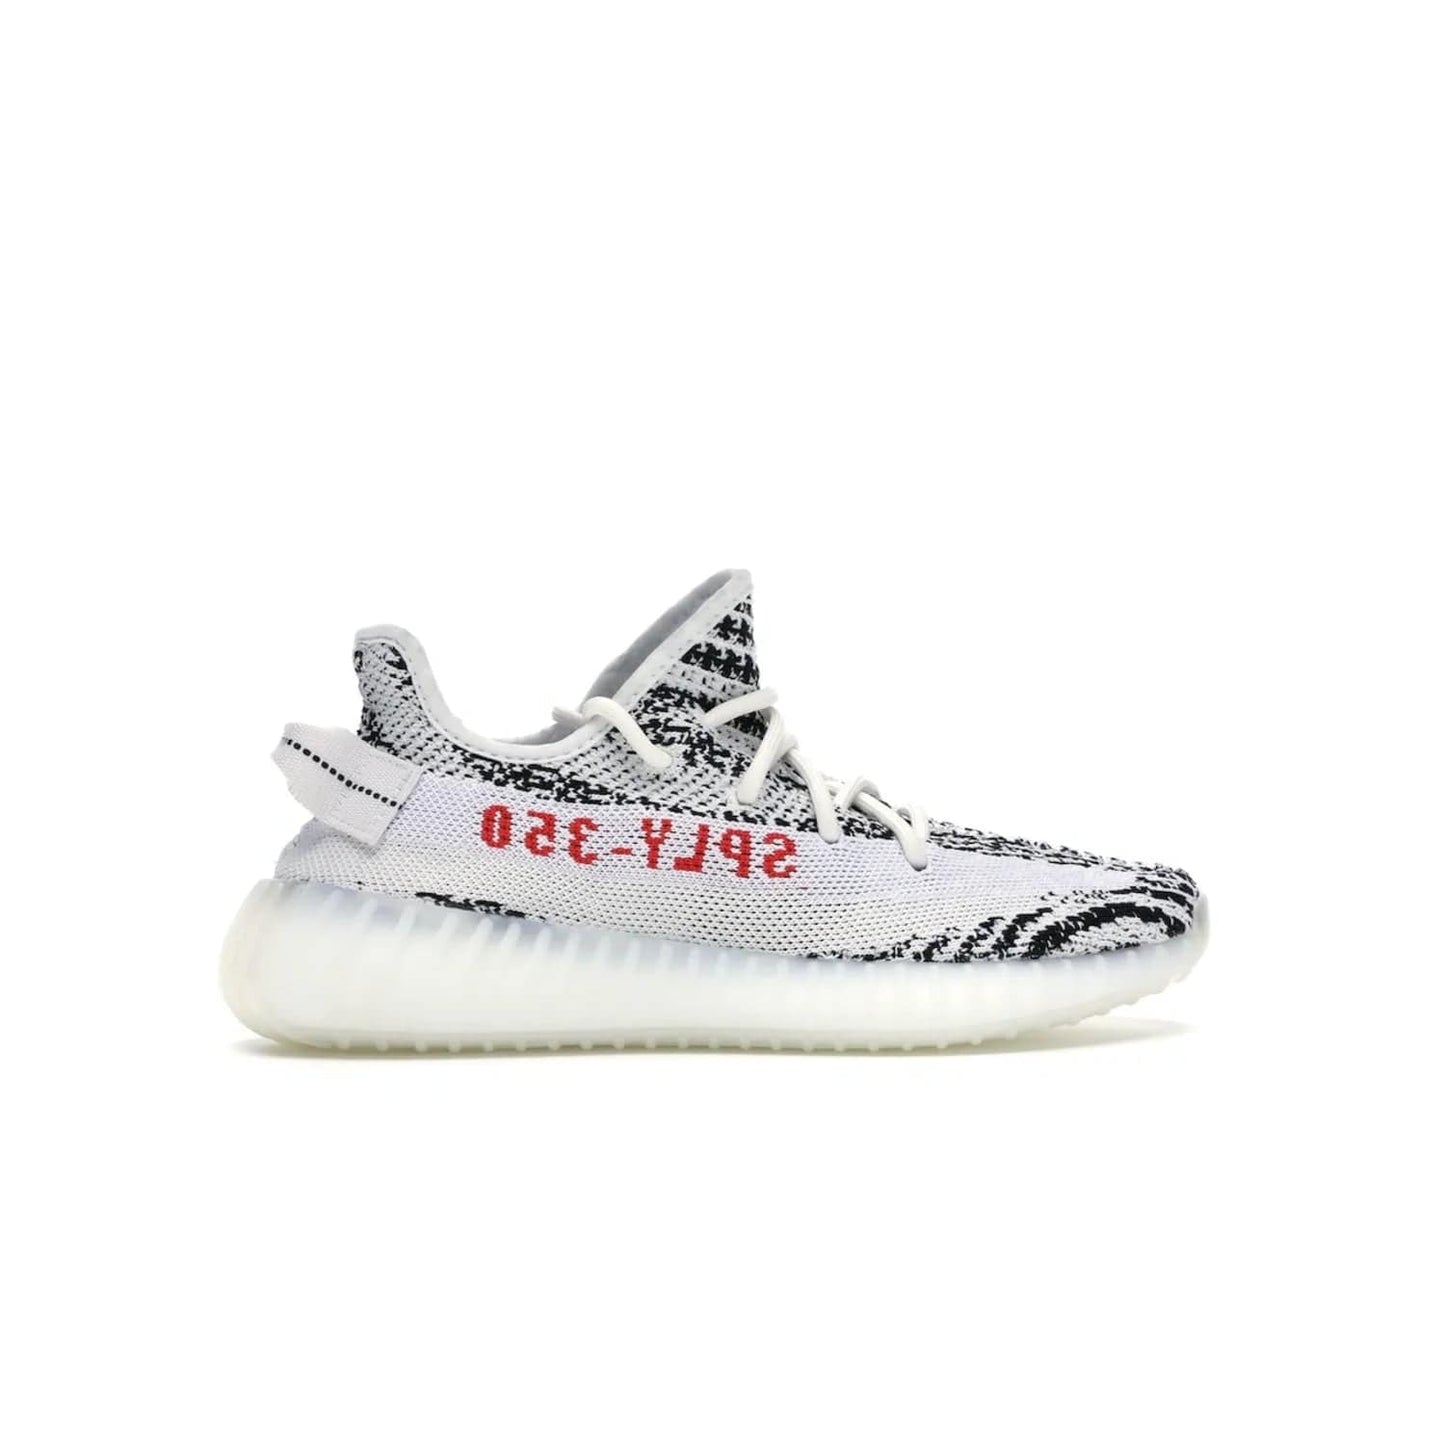 adidas Yeezy Boost 350 V2 Zebra - Image 36 - Only at www.BallersClubKickz.com - #
Score the iconic adidas Yeezy Boost 350 V2 Zebra for a fashionable addition to your street-style. Featuring a Primeknit upper and Boost sole, you'll look great and feel comfortable with every step.